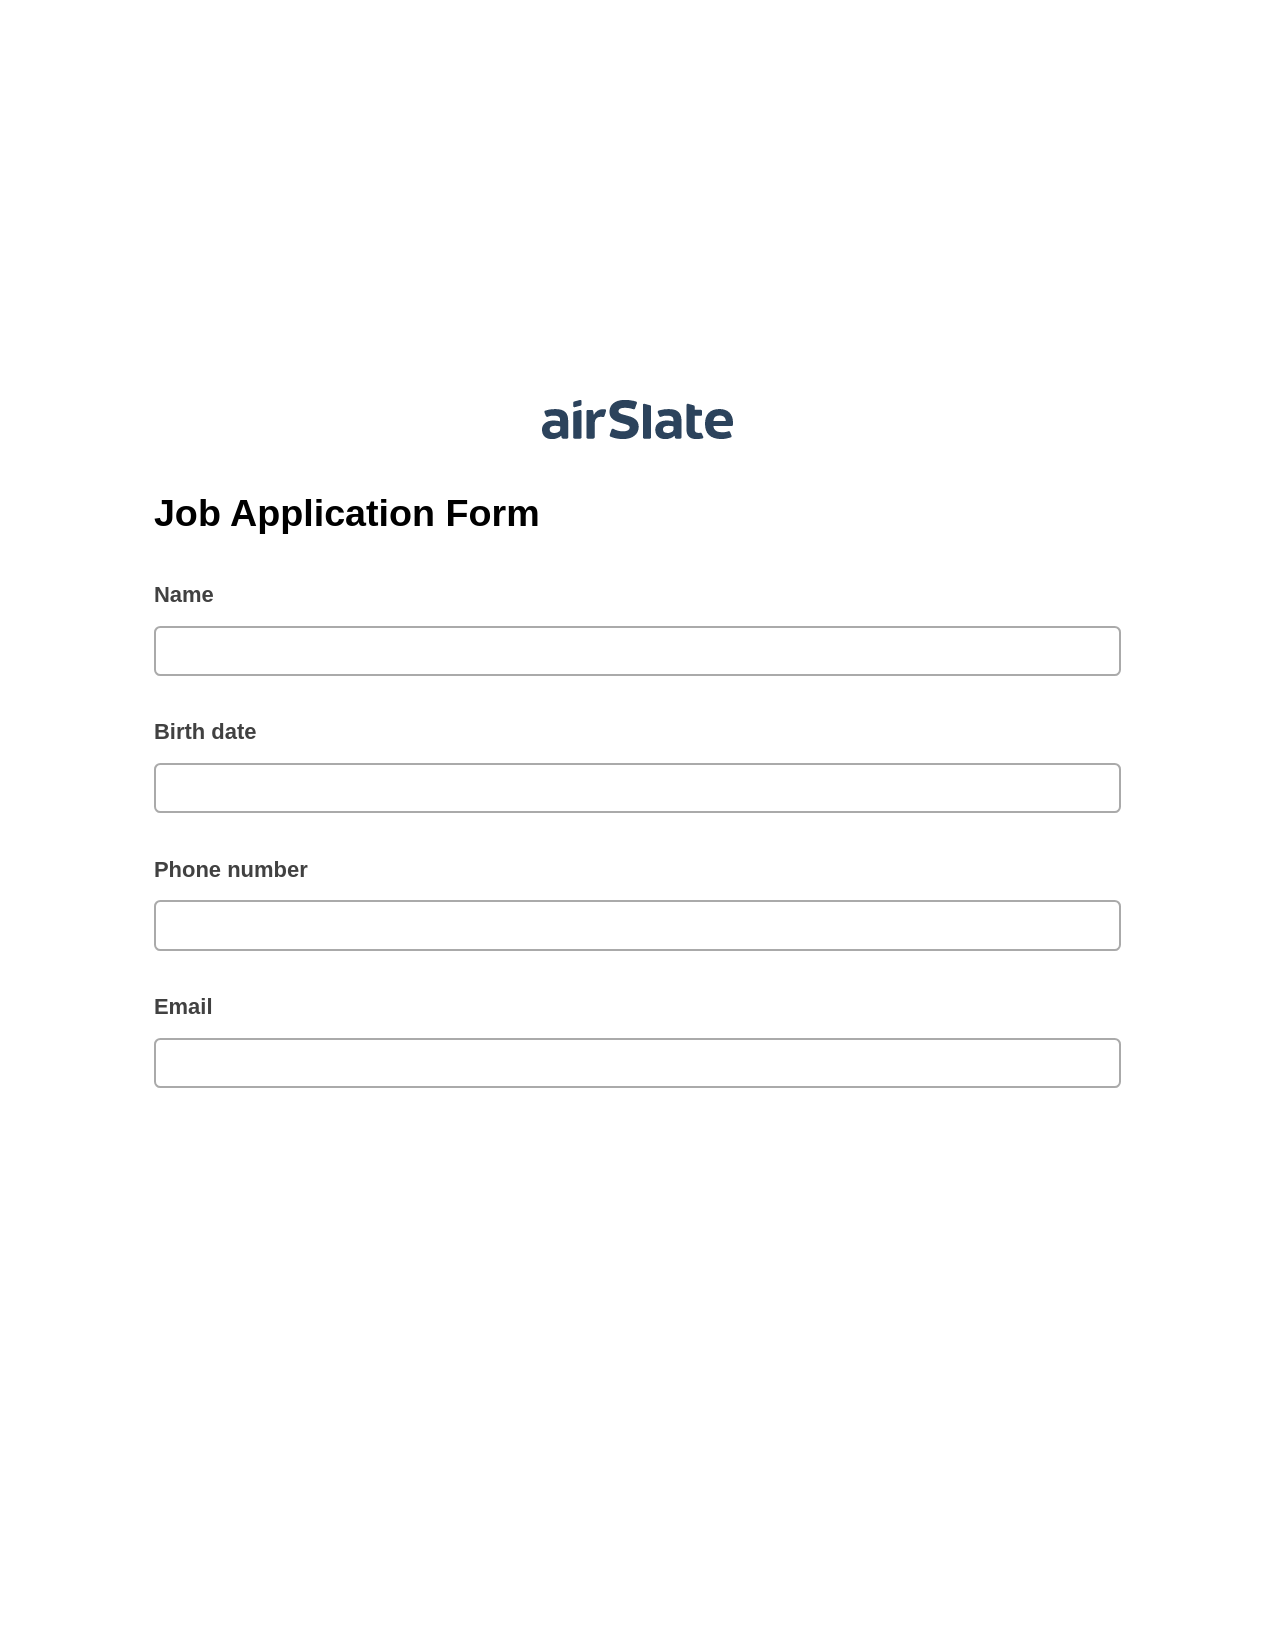 Multirole Job Application Form Pre-fill from MySQL Dropdown Options Bot, Create slate addon, Export to Excel 365 Bot